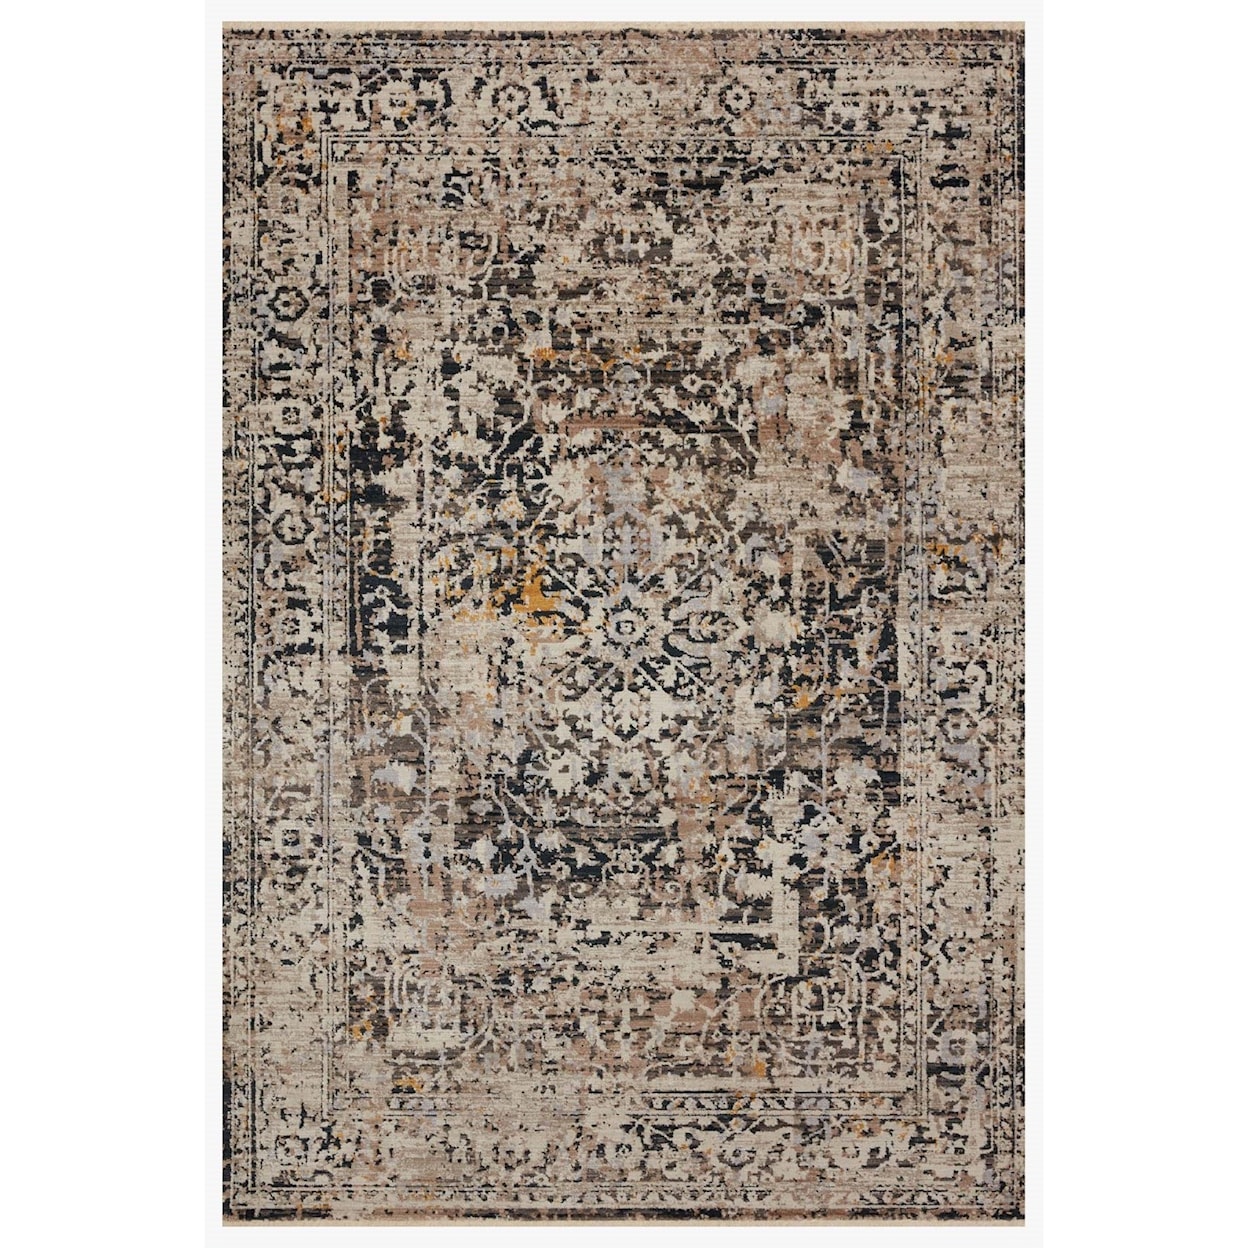 Reeds Rugs Leigh 9'6" x 13' Charcoal / Taupe Rug